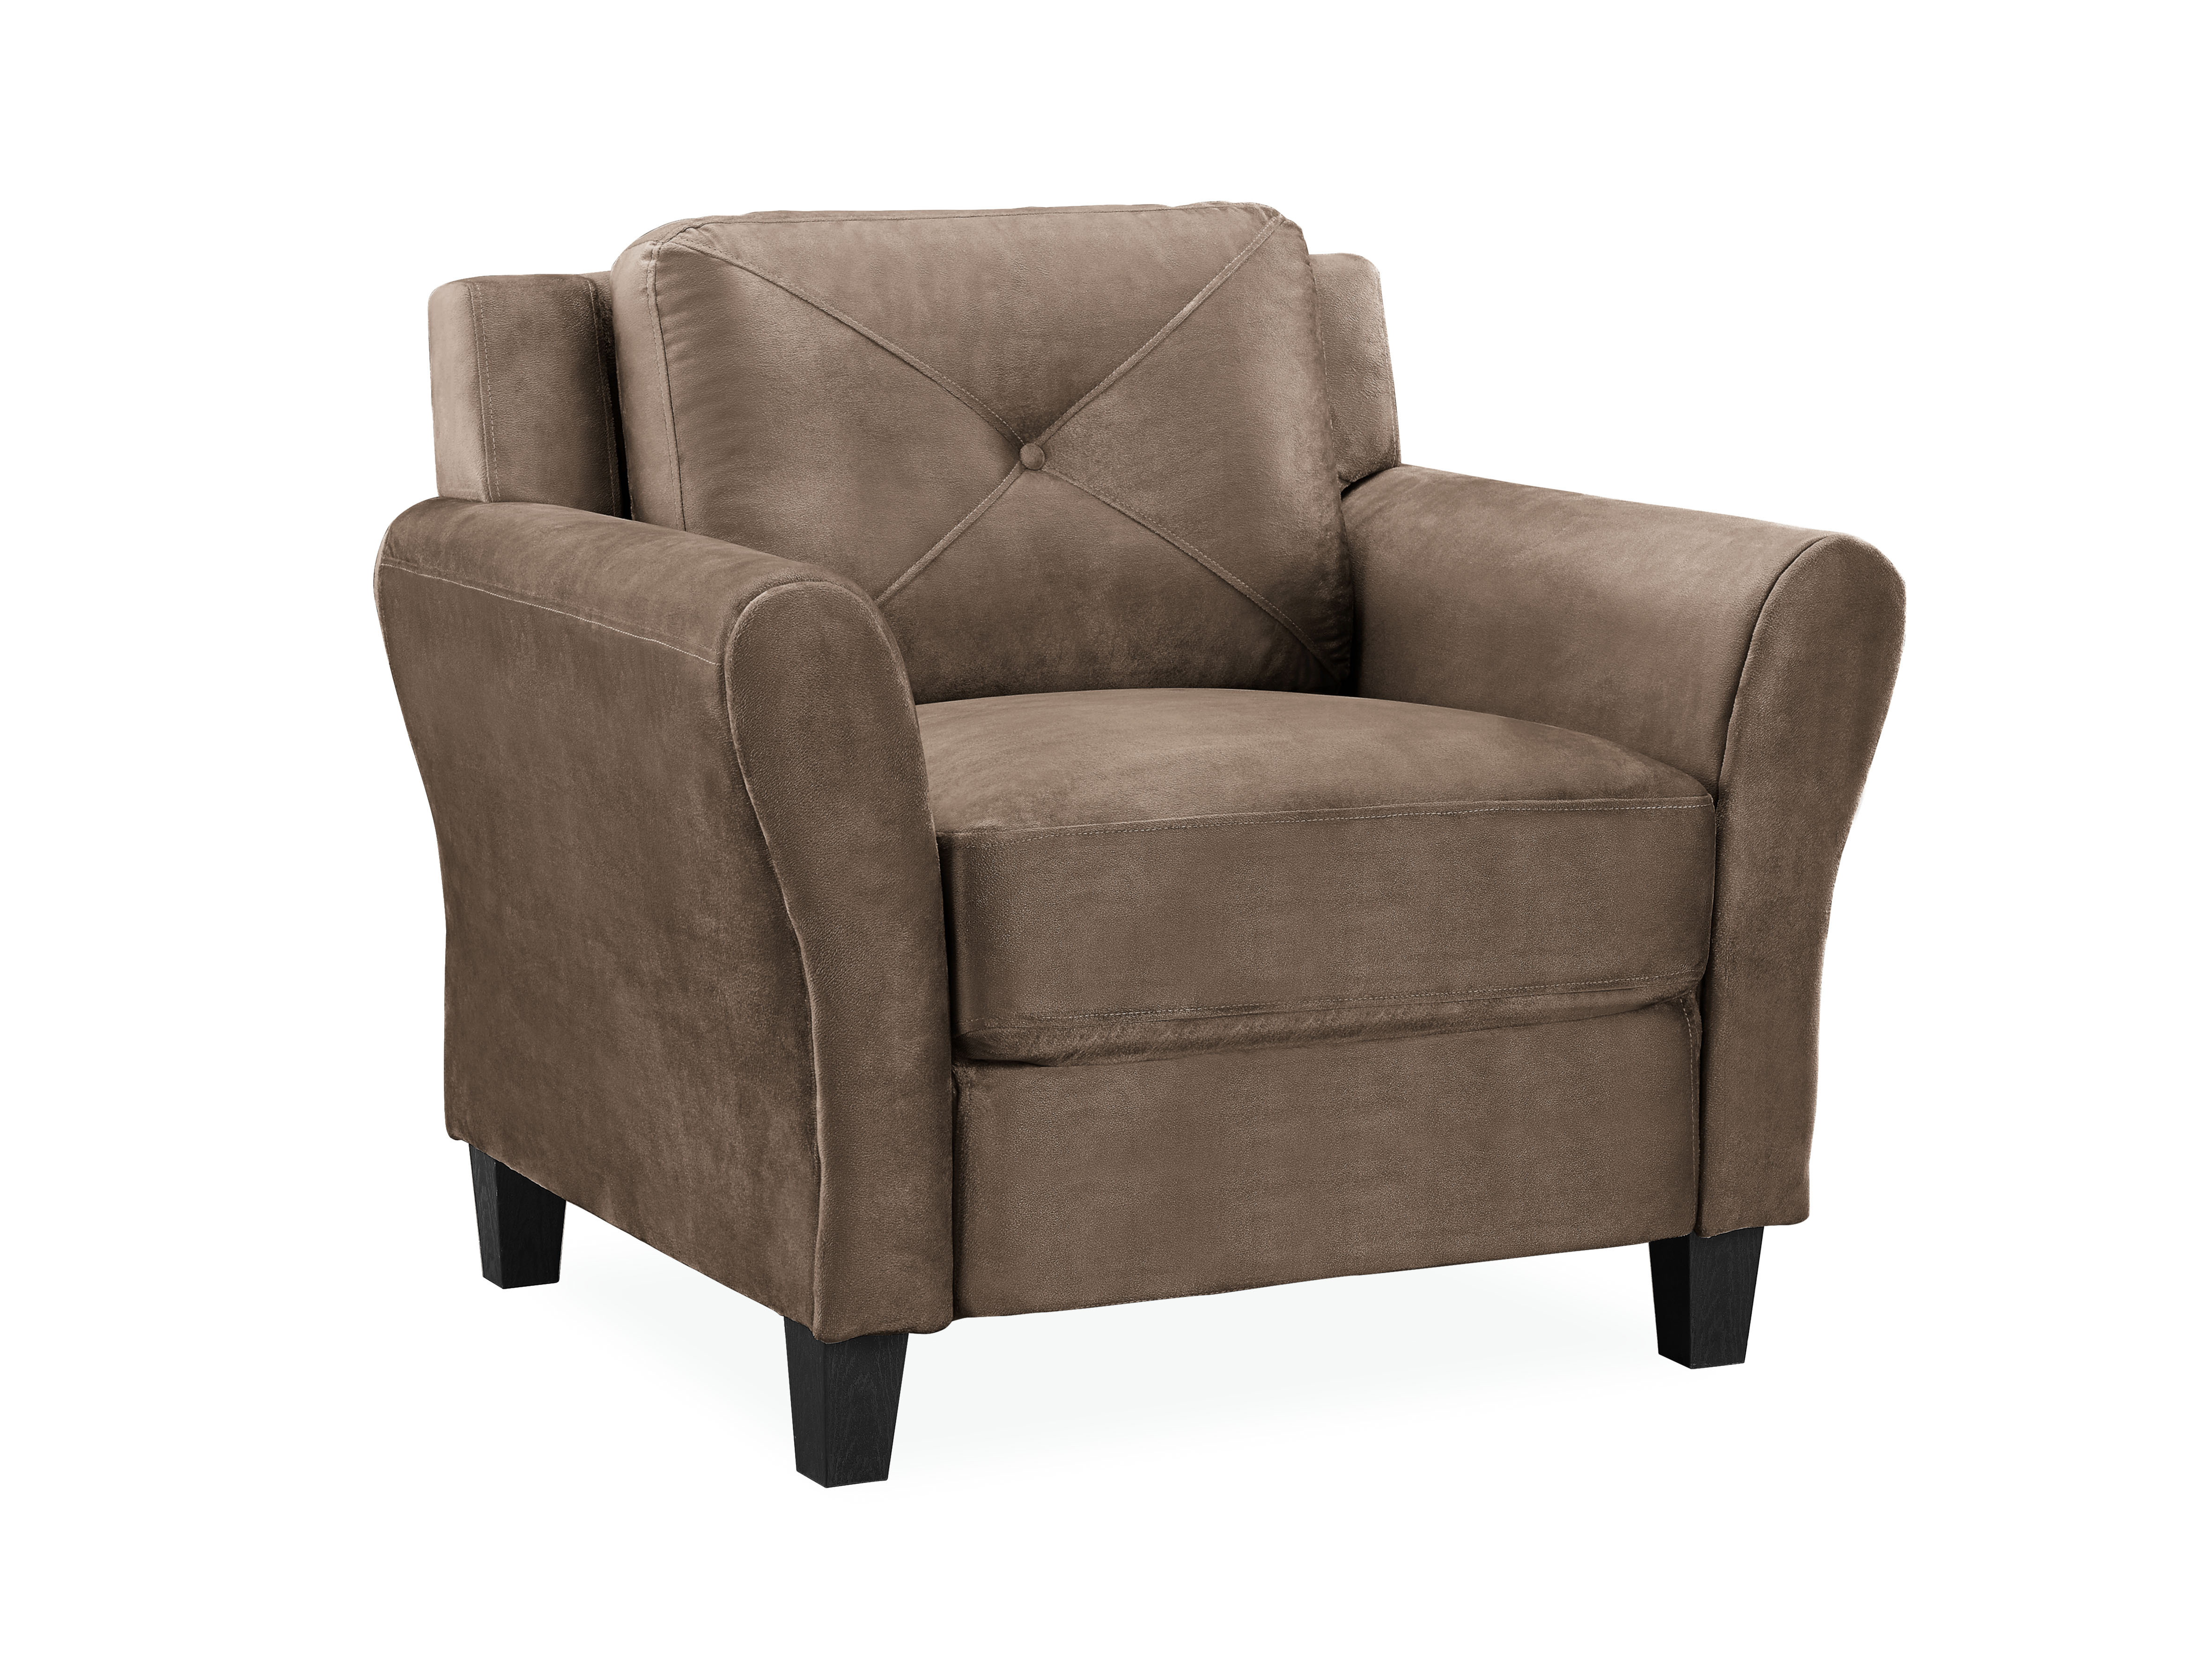 Lifestyle Solutions Taryn Lounge Chair with Rolled Arms, Brown Polyester Fabric - image 1 of 16